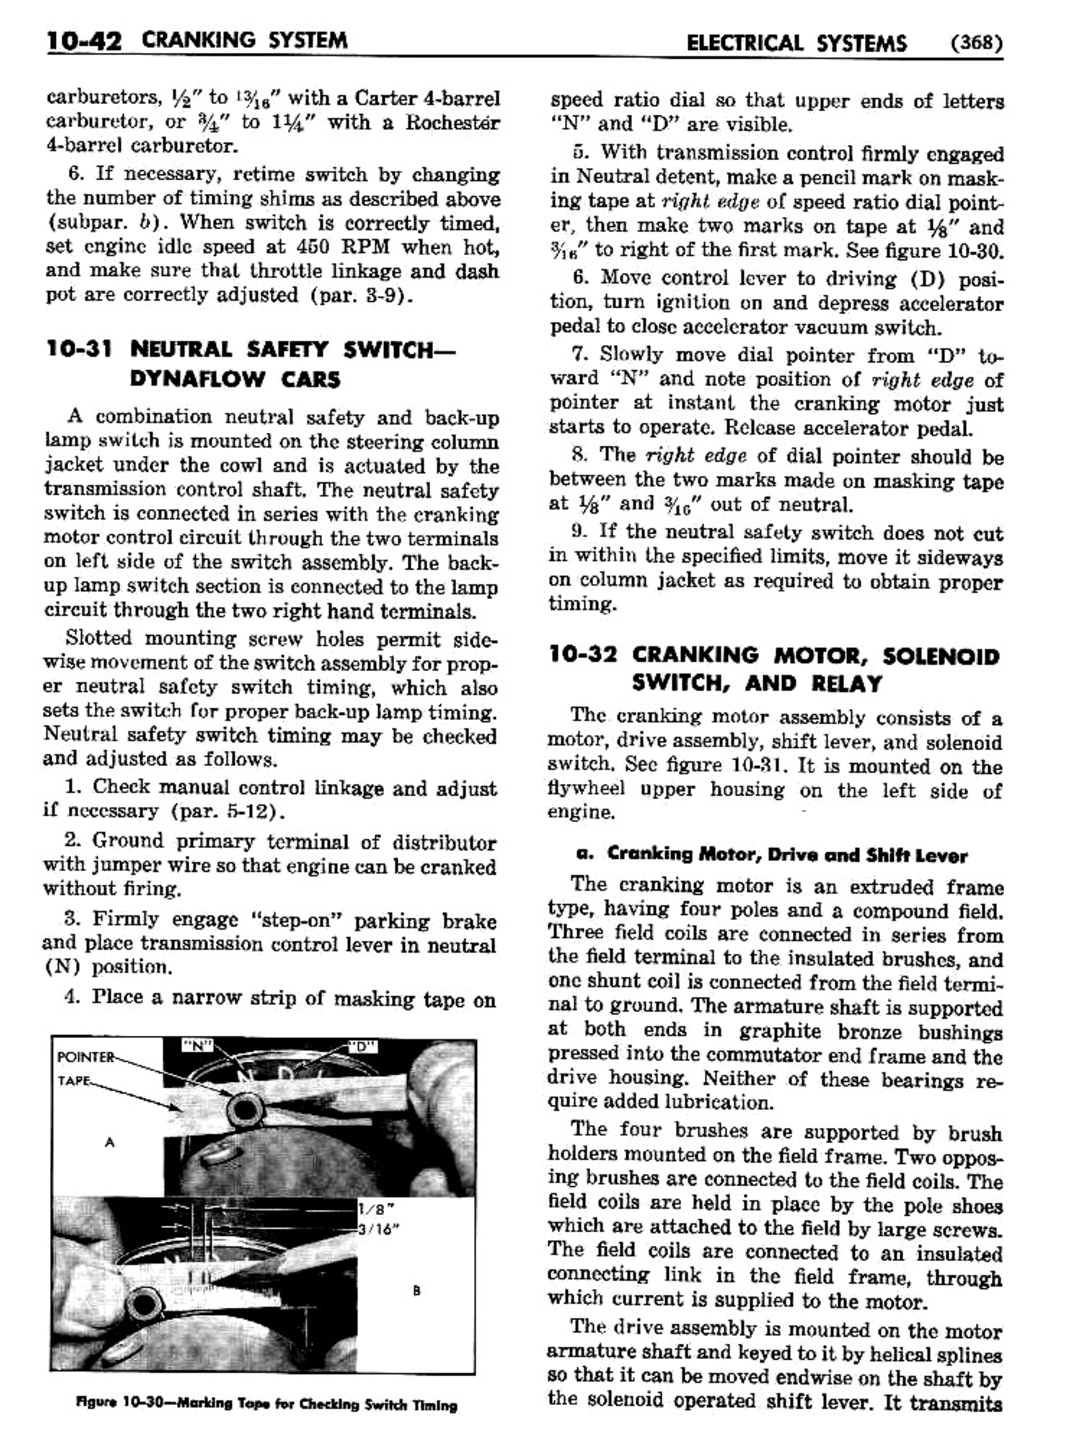 n_11 1956 Buick Shop Manual - Electrical Systems-042-042.jpg